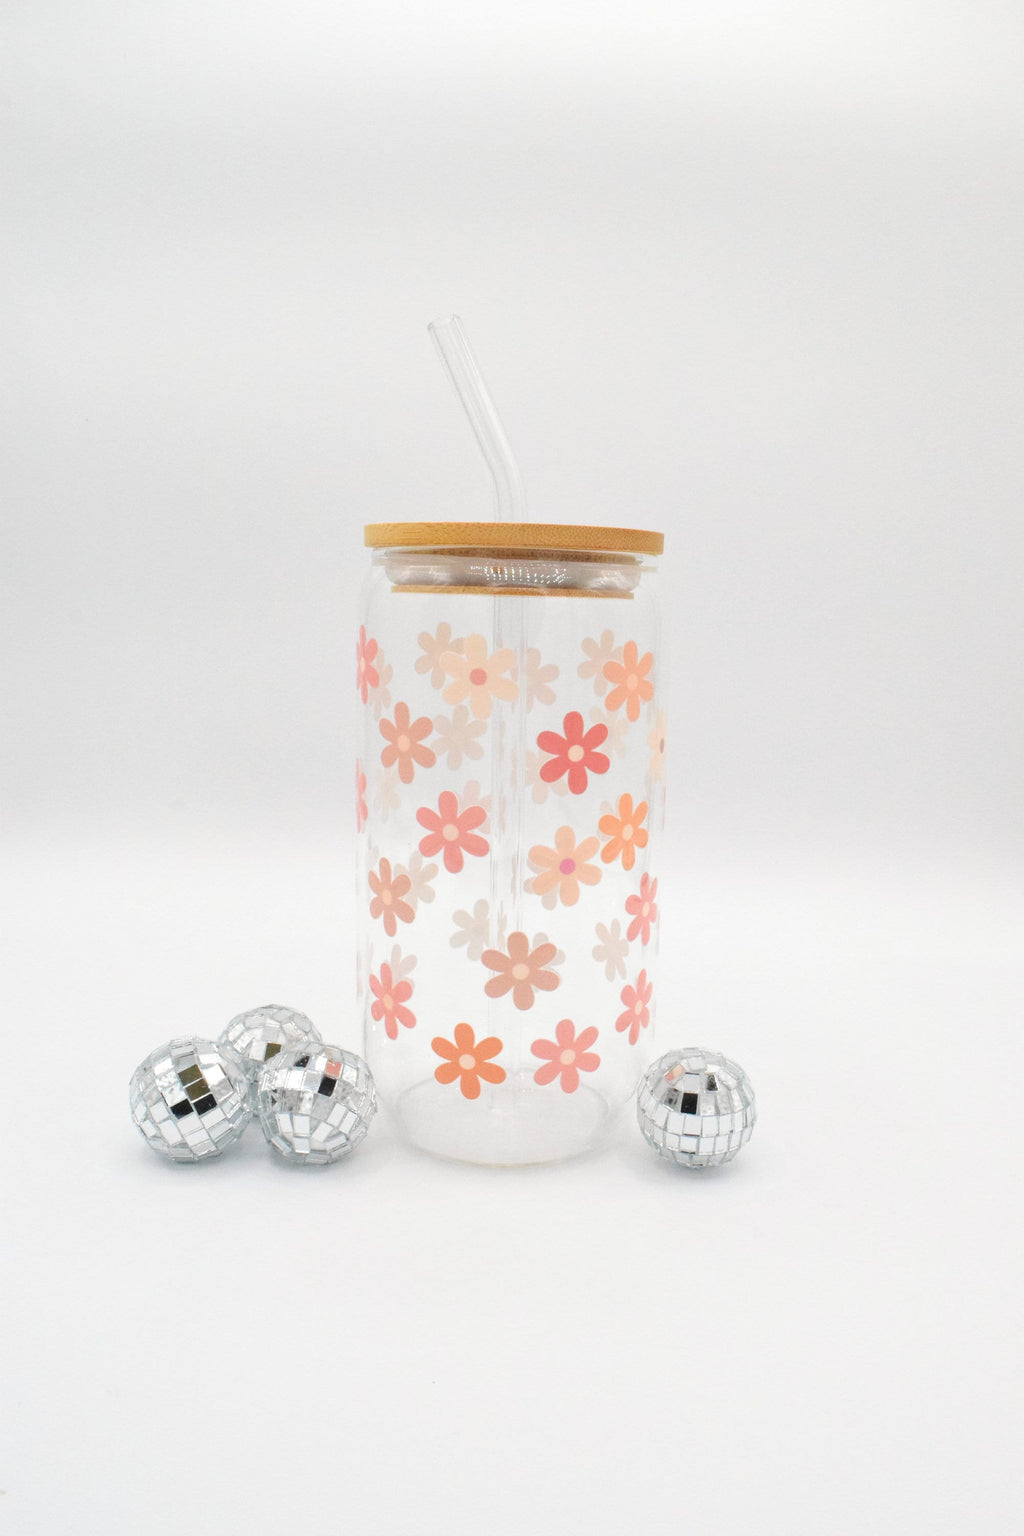 Pink Daisy Glass Cup